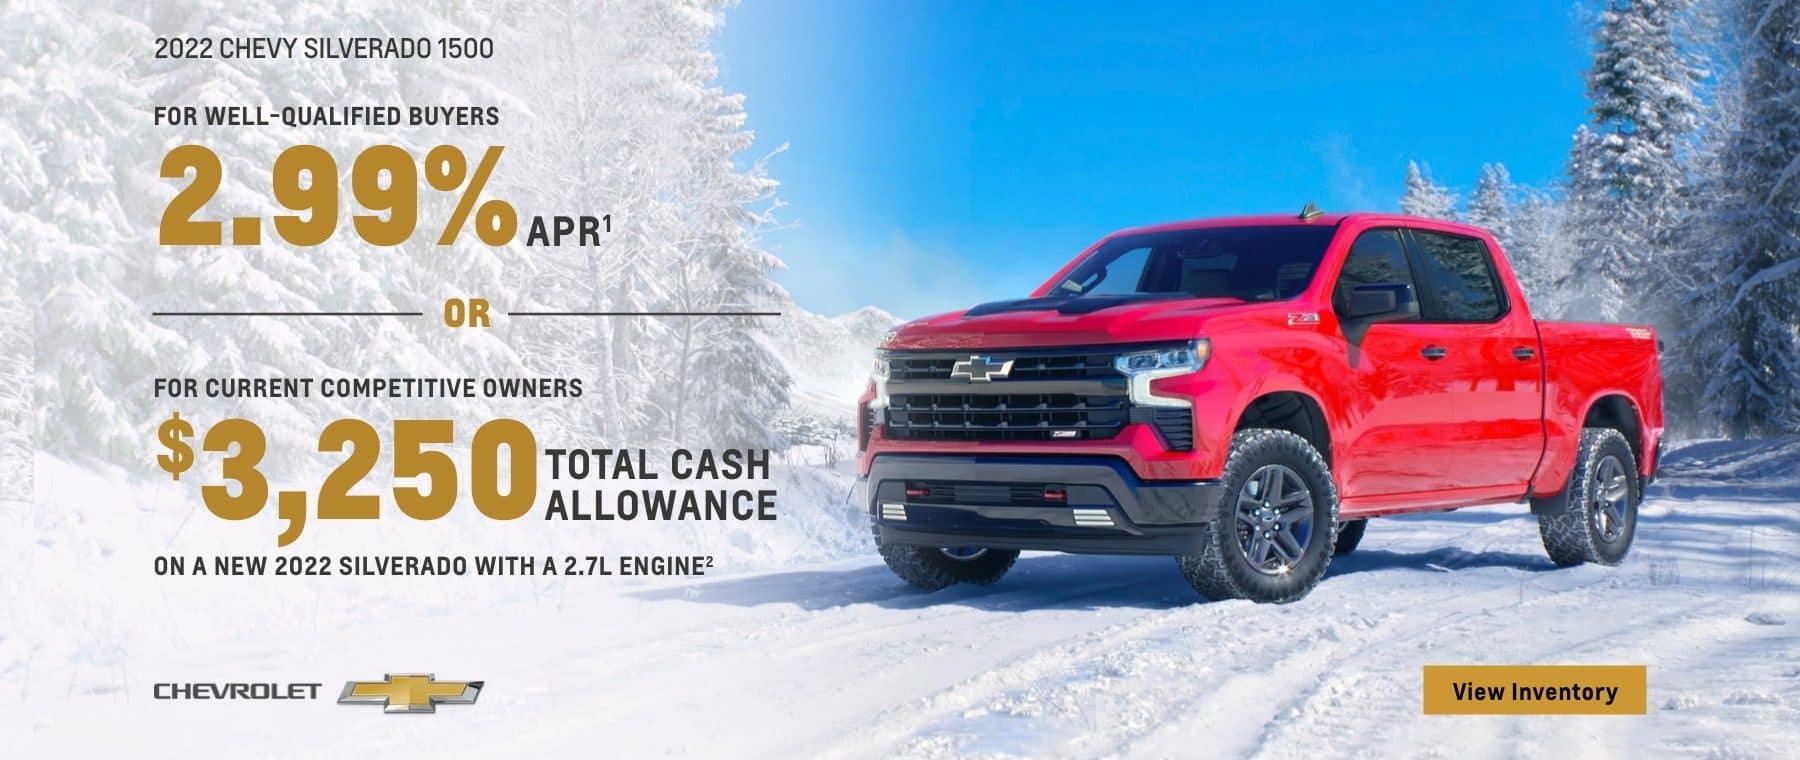 2022 Chevy Silverado 1500. For well-qualified buyers 2.99% APR. Or, for current competitive owners $3,250 total cash allowance on a new 2022 Silverado with a 2.7L engine.